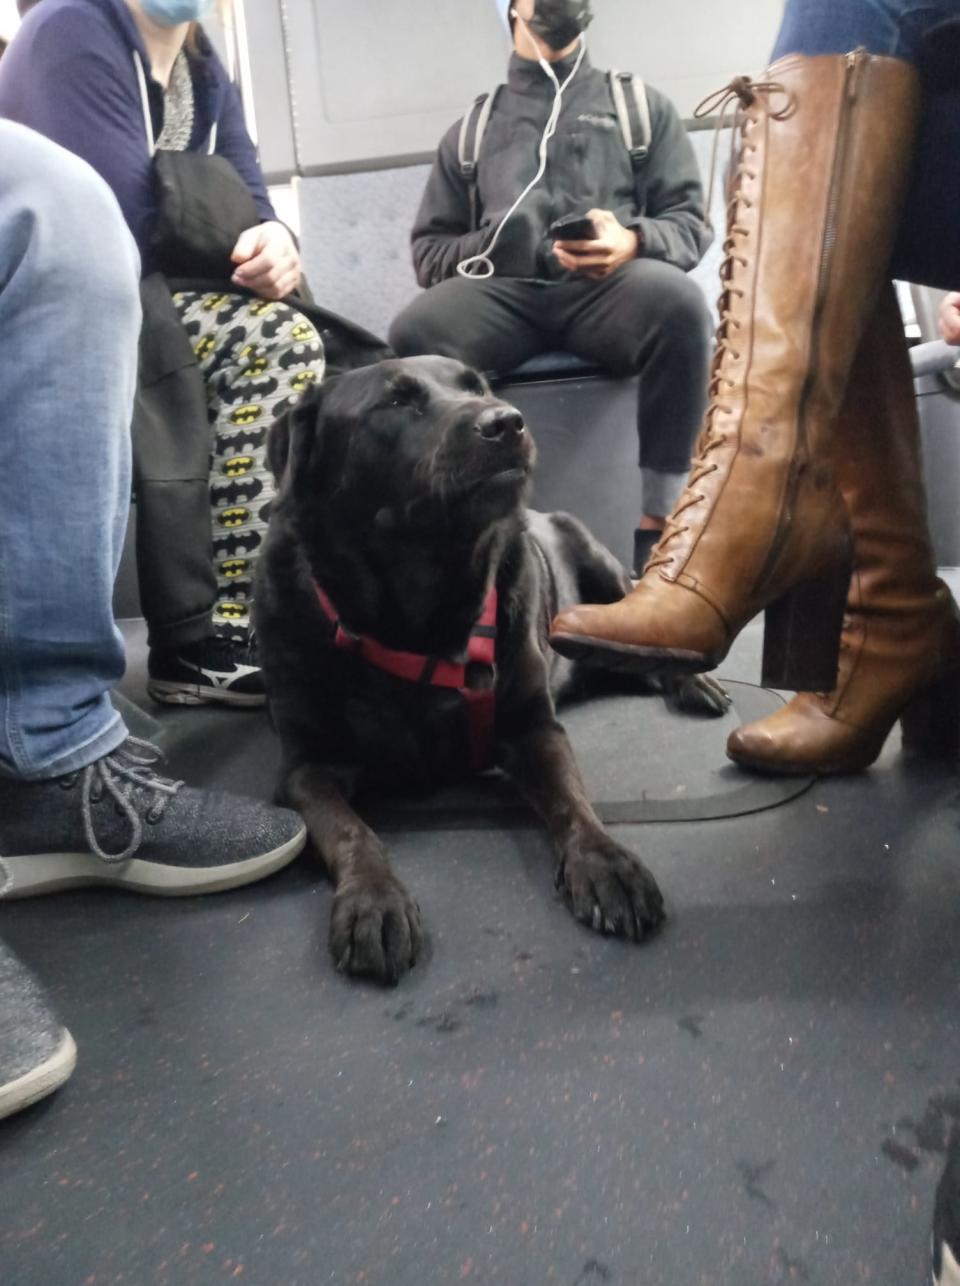 Eclipse, a dog who gained notoriety for riding Seattle’s city bus alone, is seen riding the bus in November 2021.